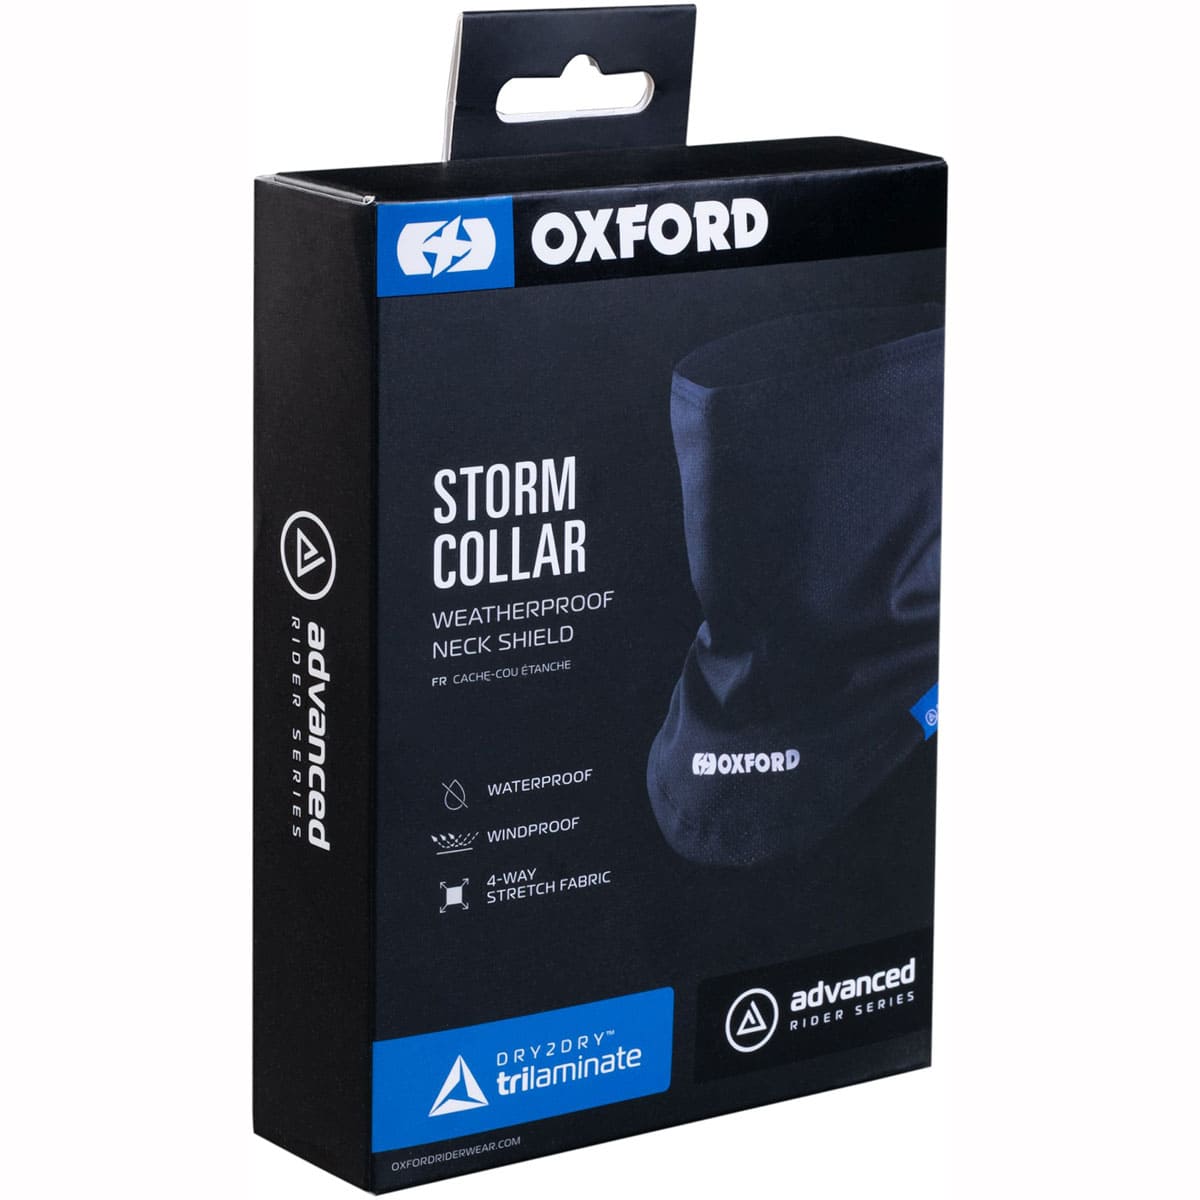 Oxford Advanced Storm Collar: A waterproof thermal baselayer